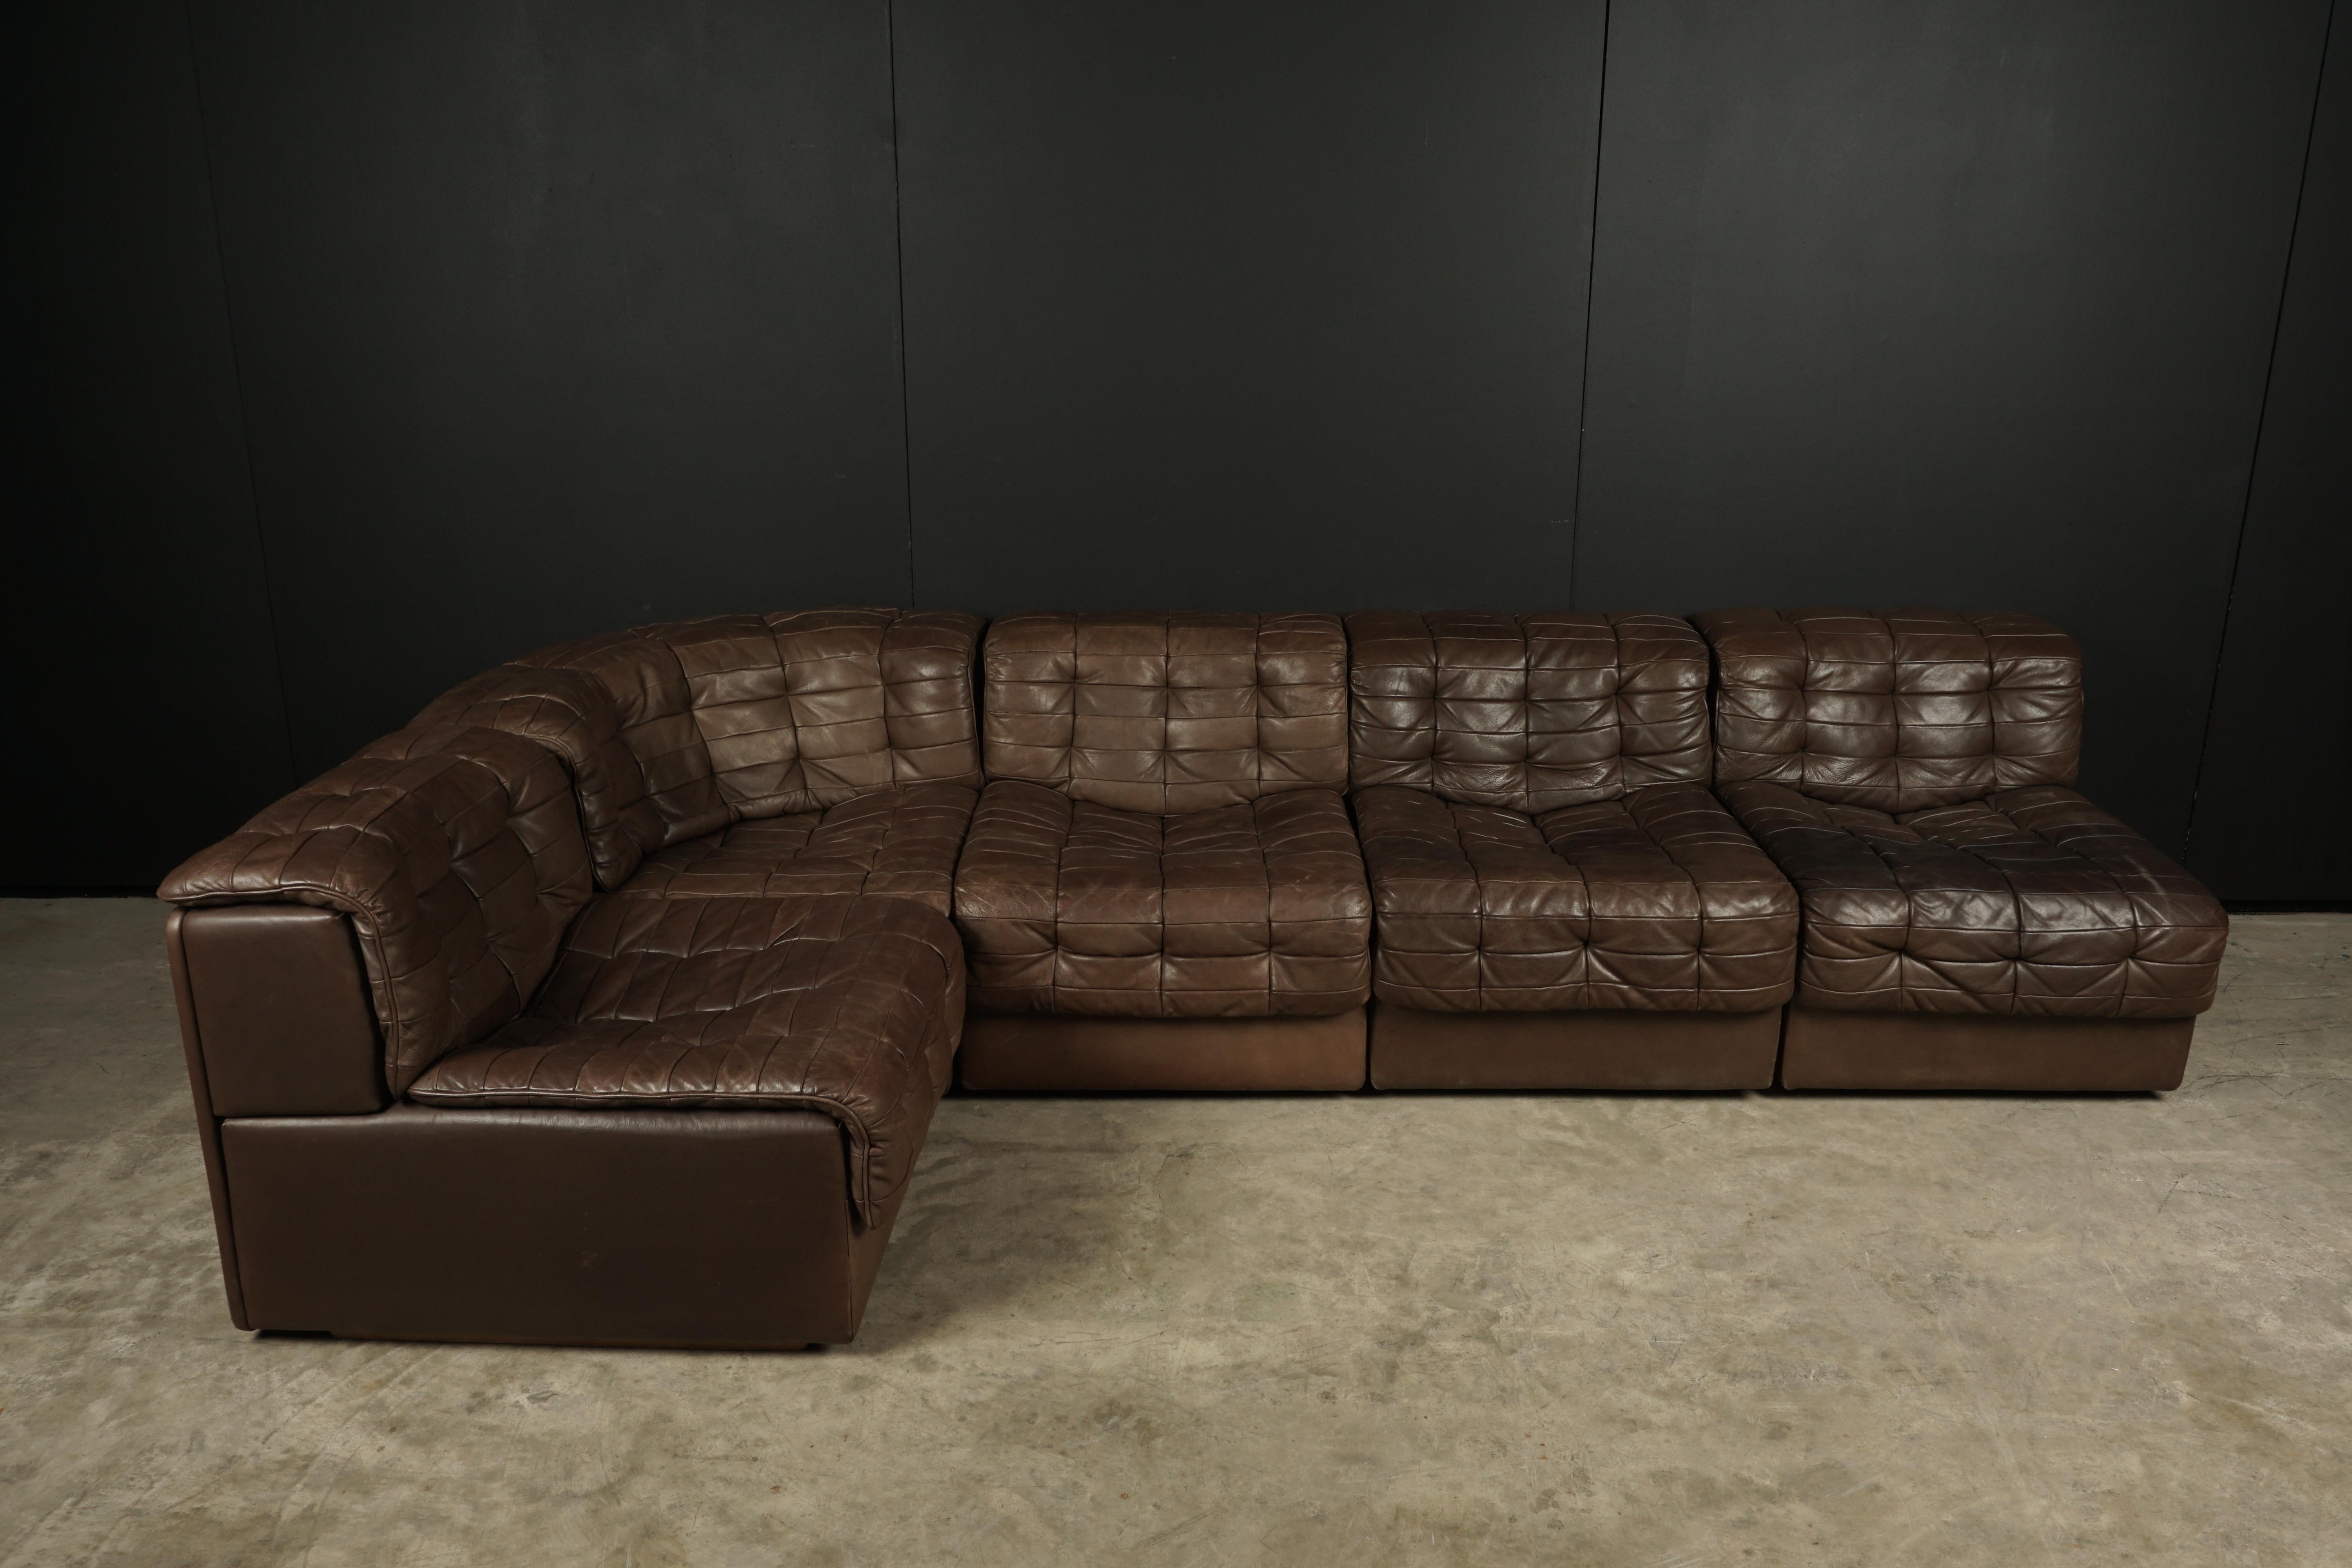 Vintage De Sede DS11 Sectional Patchwork sofa, 1970s. Original brown leather upholstery. Manufactured by De Sede in Switzerland. This sofa consists of five modular elements.

Corner Element :
H - 25 / W - 32 / D - 32 / S - 15.